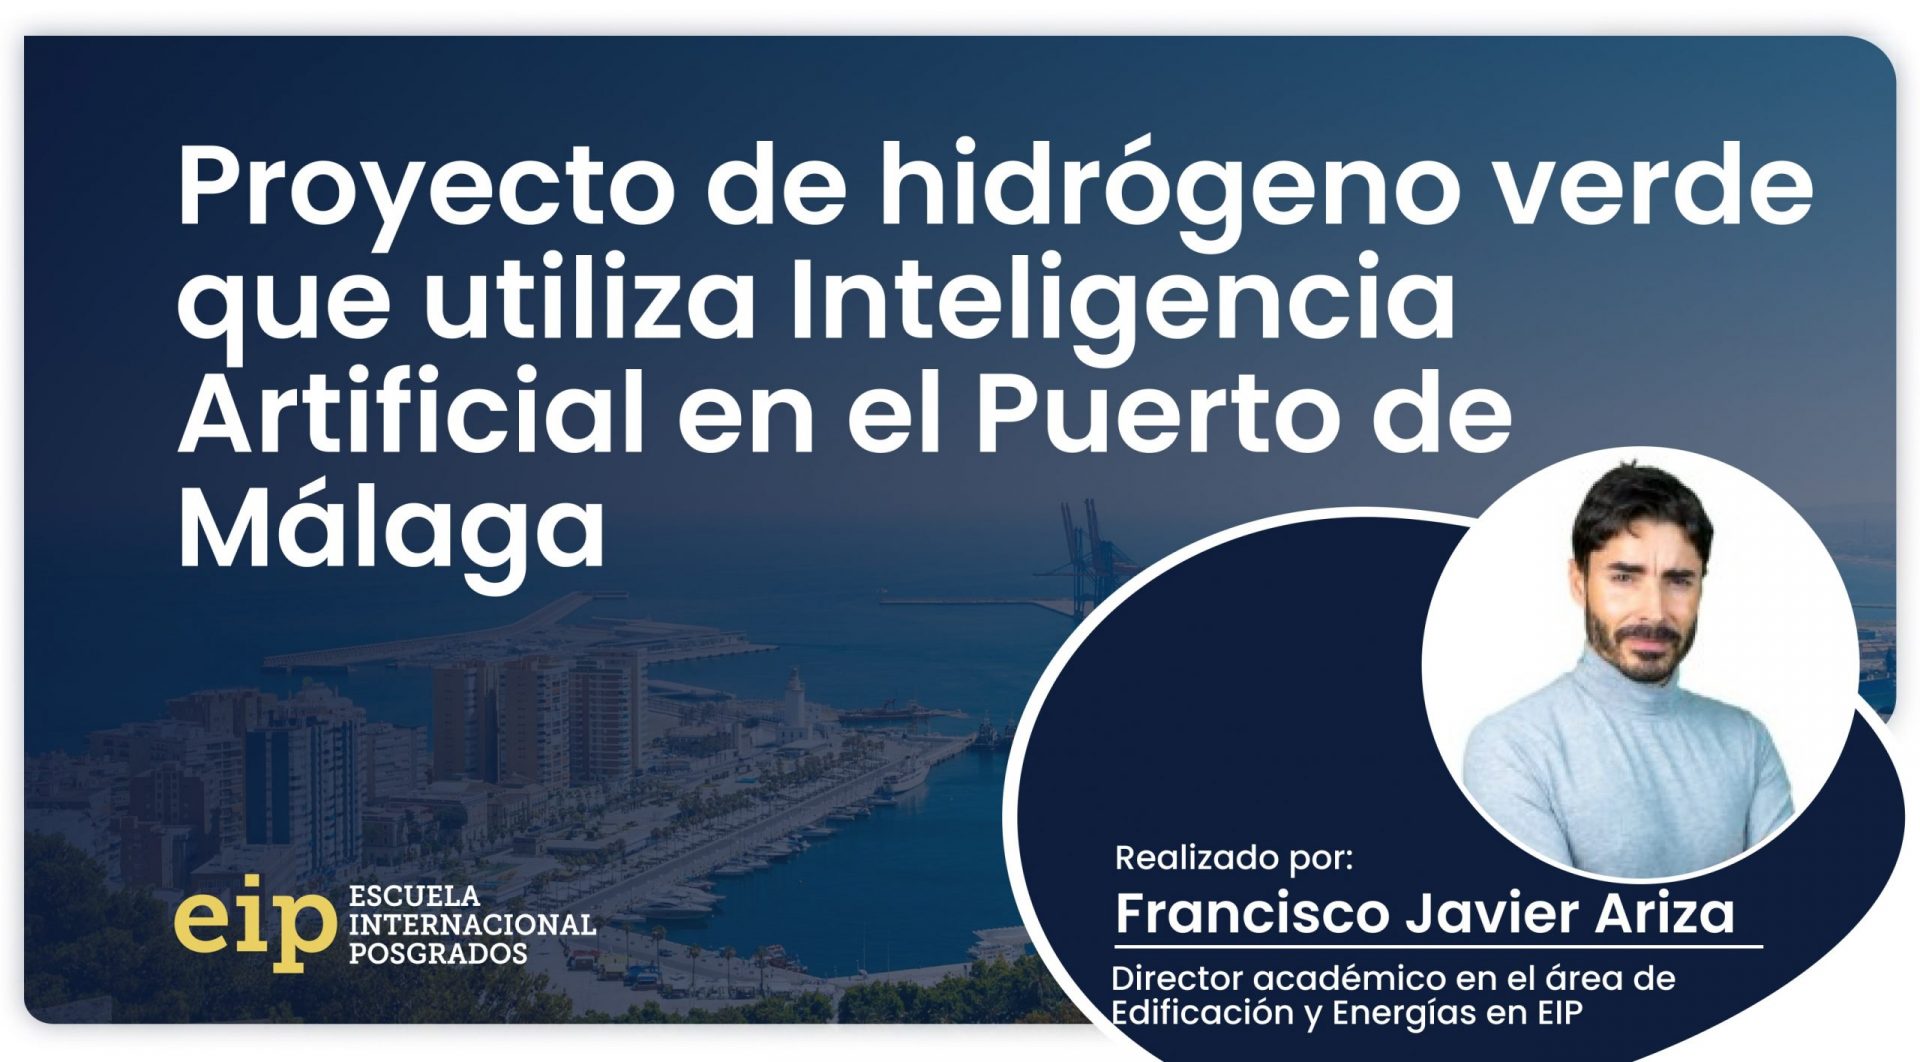 green hydrogen project in the port of malaga scaled